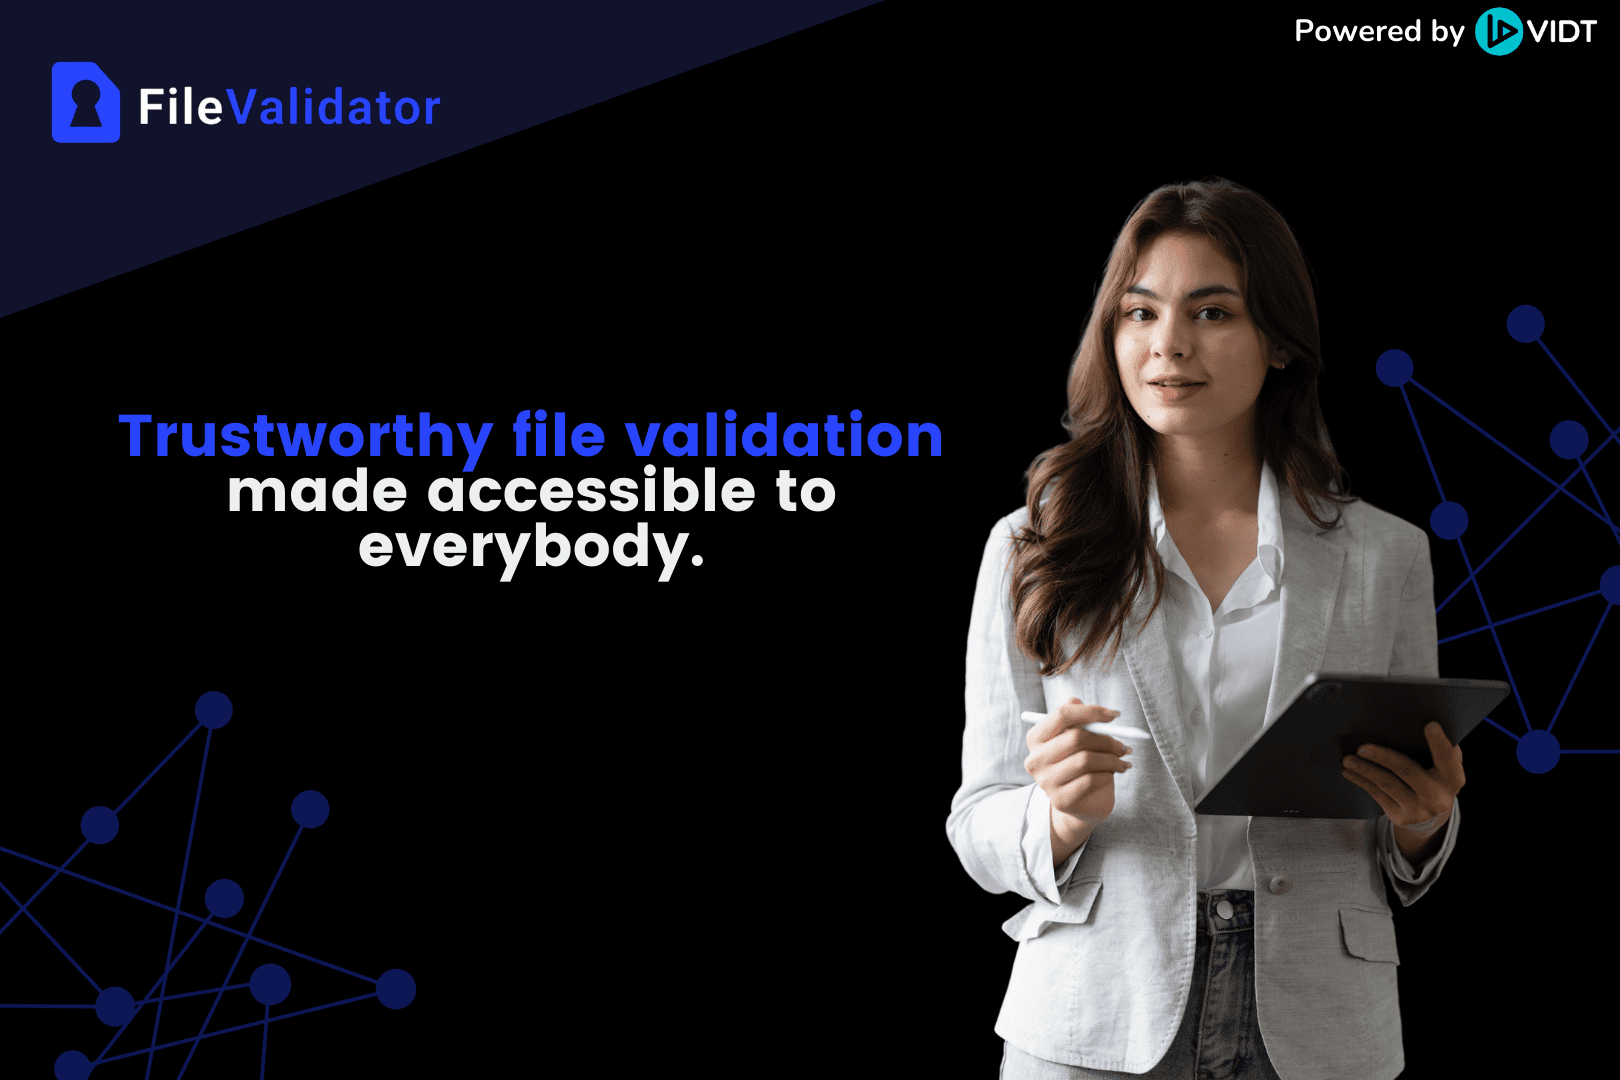 Introducing-filevalidator:-timestamping-digital-files-with-vidt-dao-powered-blockchain-technology